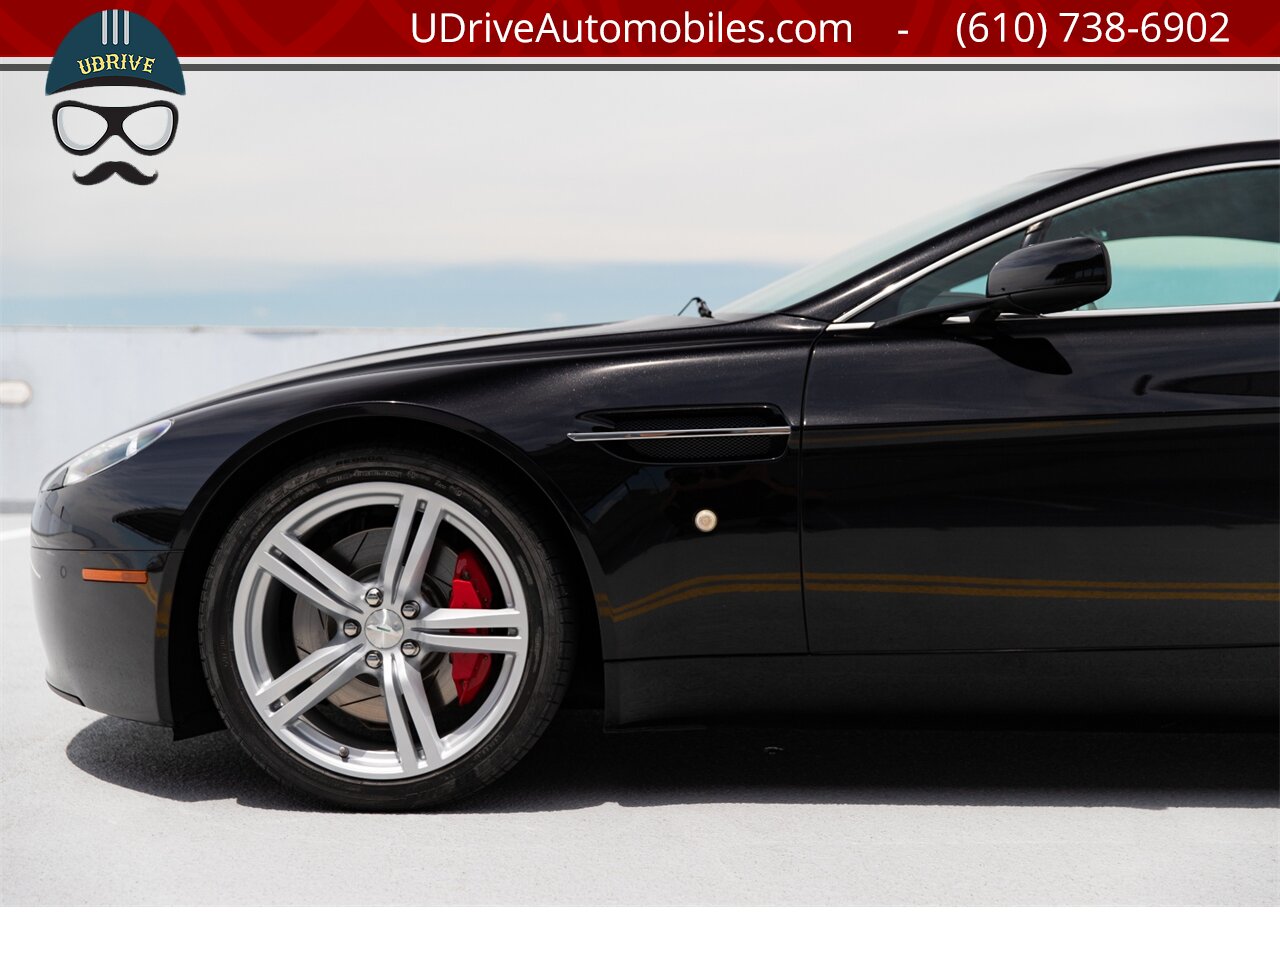 2009 Aston Martin Vantage 6 Speed Manual 1 Owner 12k Miles Sprts Pack NAV  $136,470 MSRP Red Calipers - Photo 8 - West Chester, PA 19382